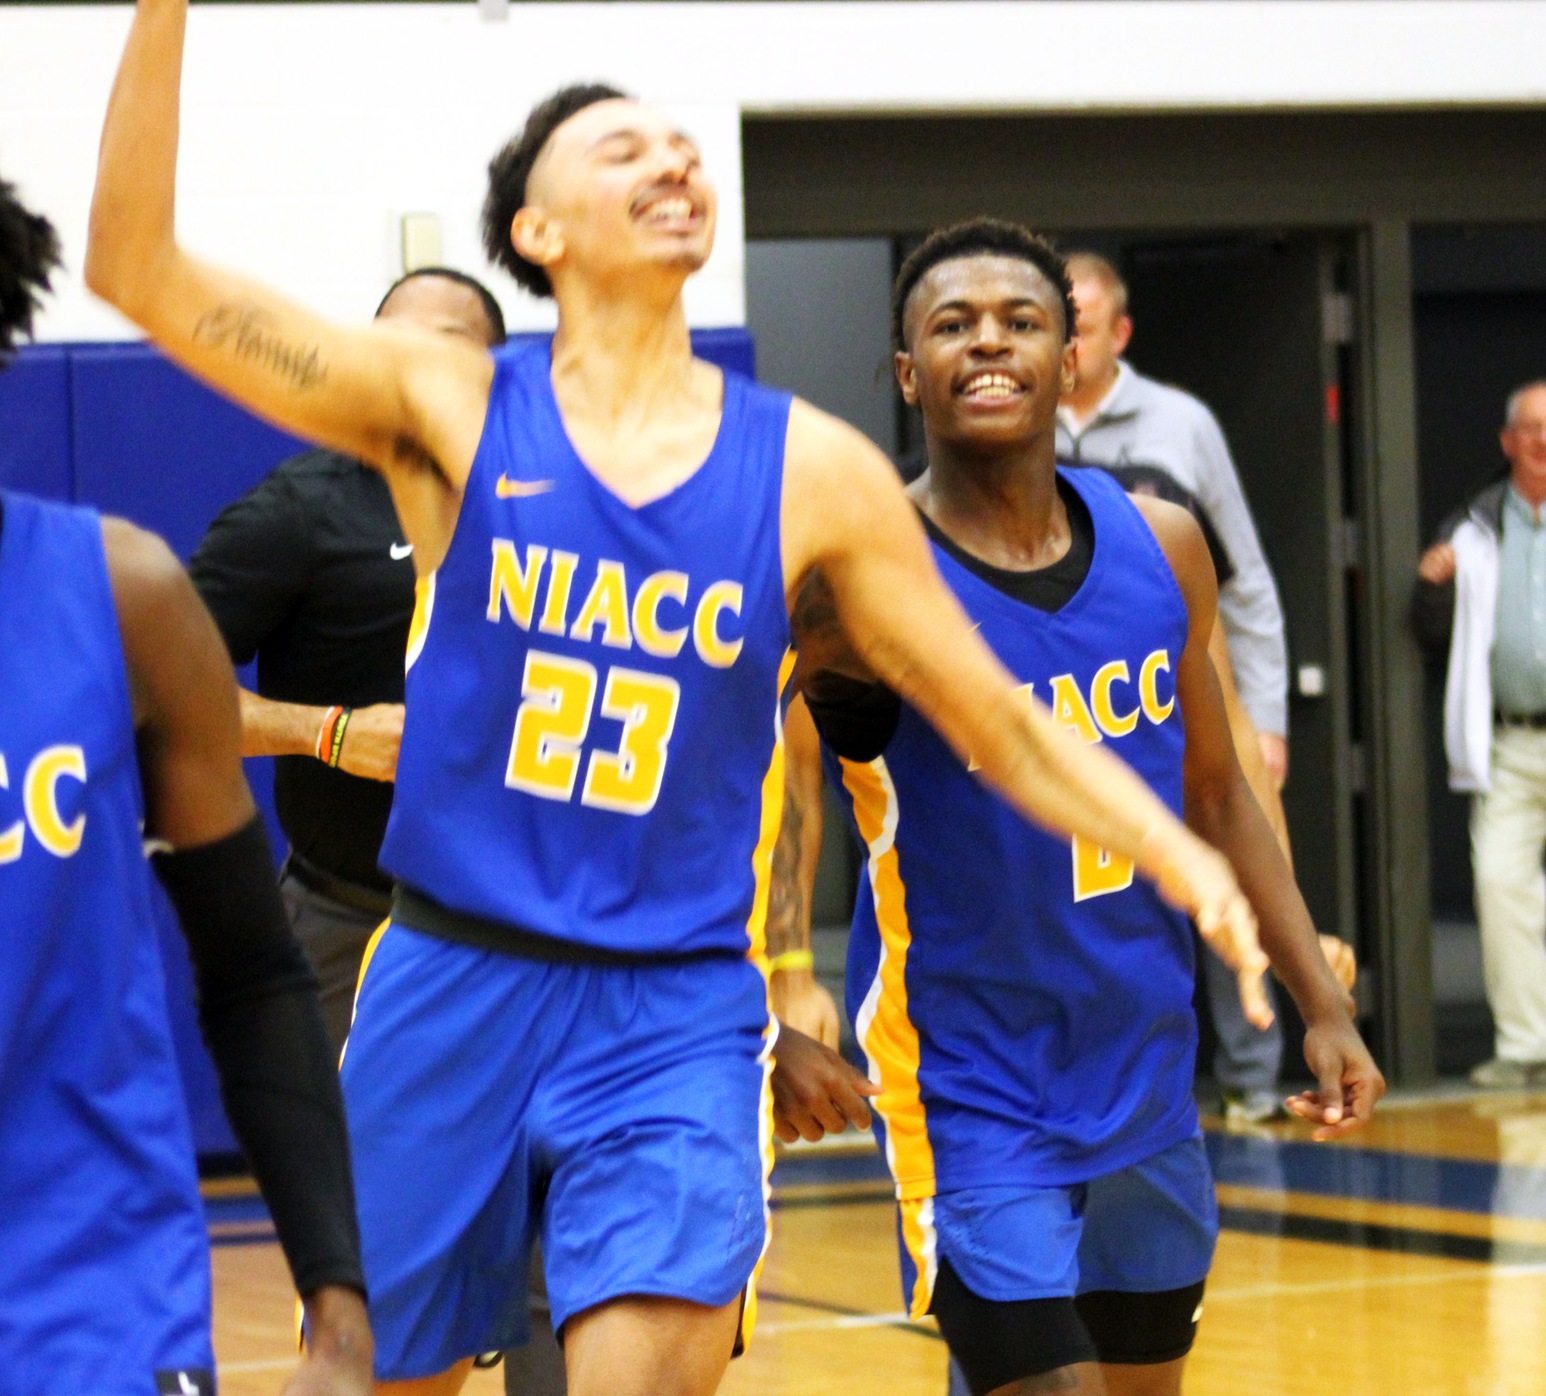 NIACC players celebrate their semifinal win over Kirkwood in the regional semifinals.